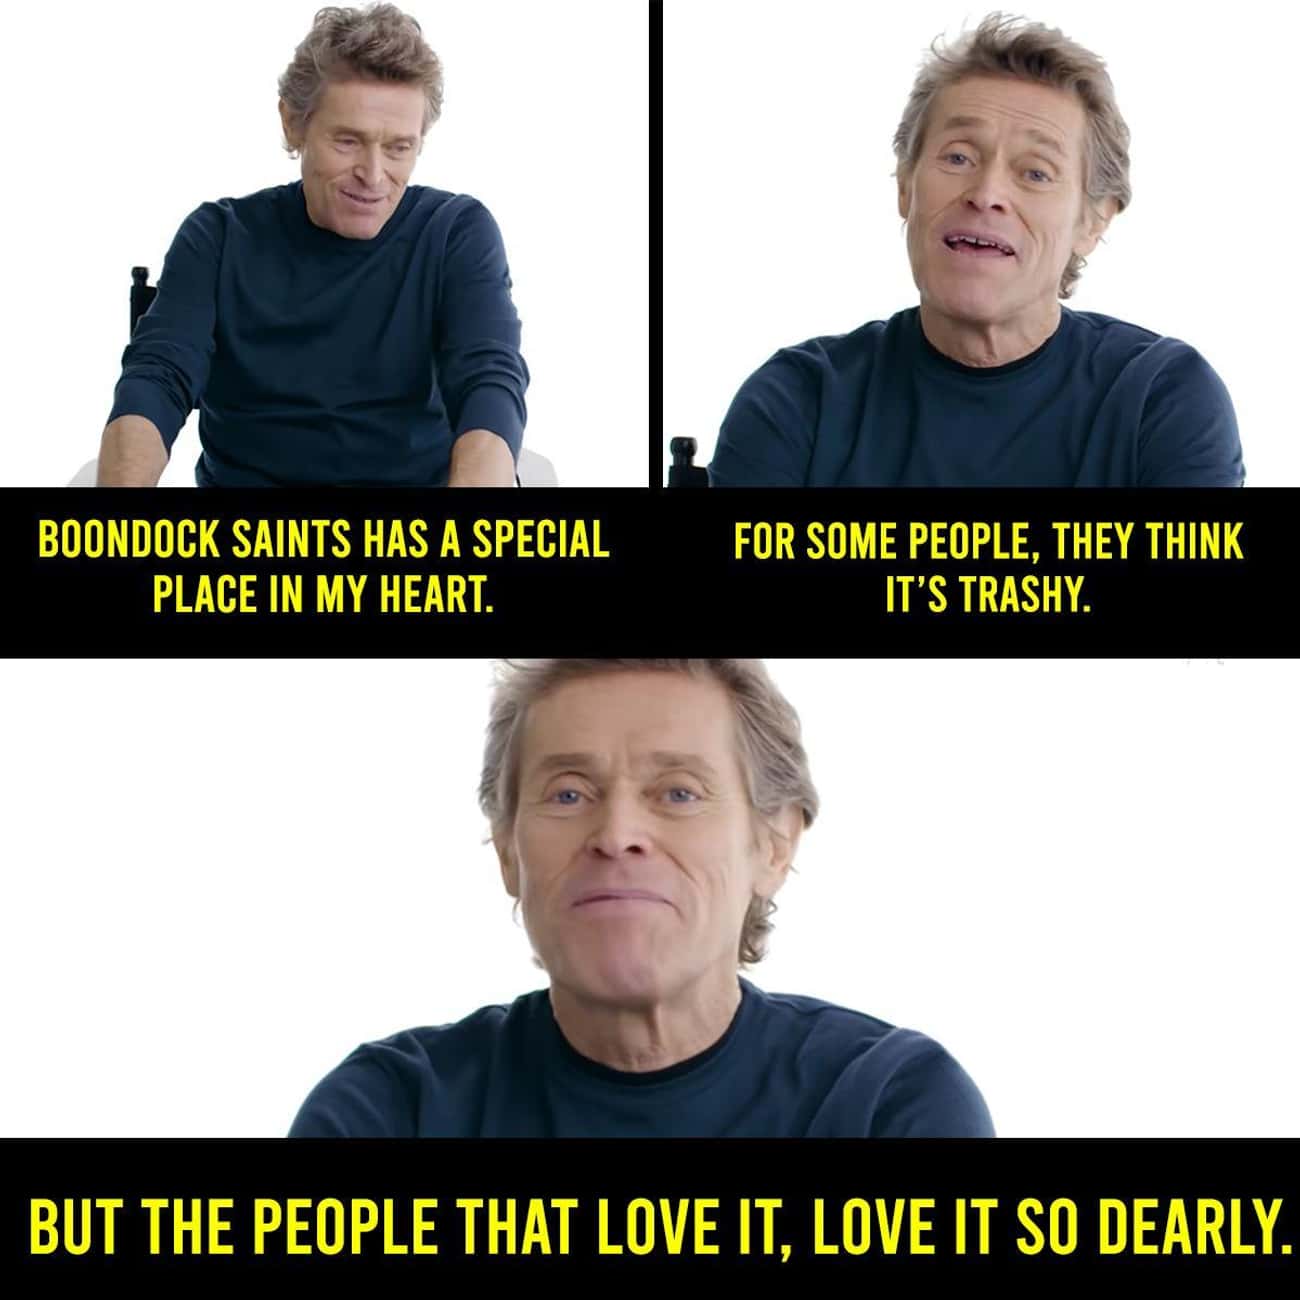 When He Admitted That 'Boondock Saints' Has A Special Place In His Heart